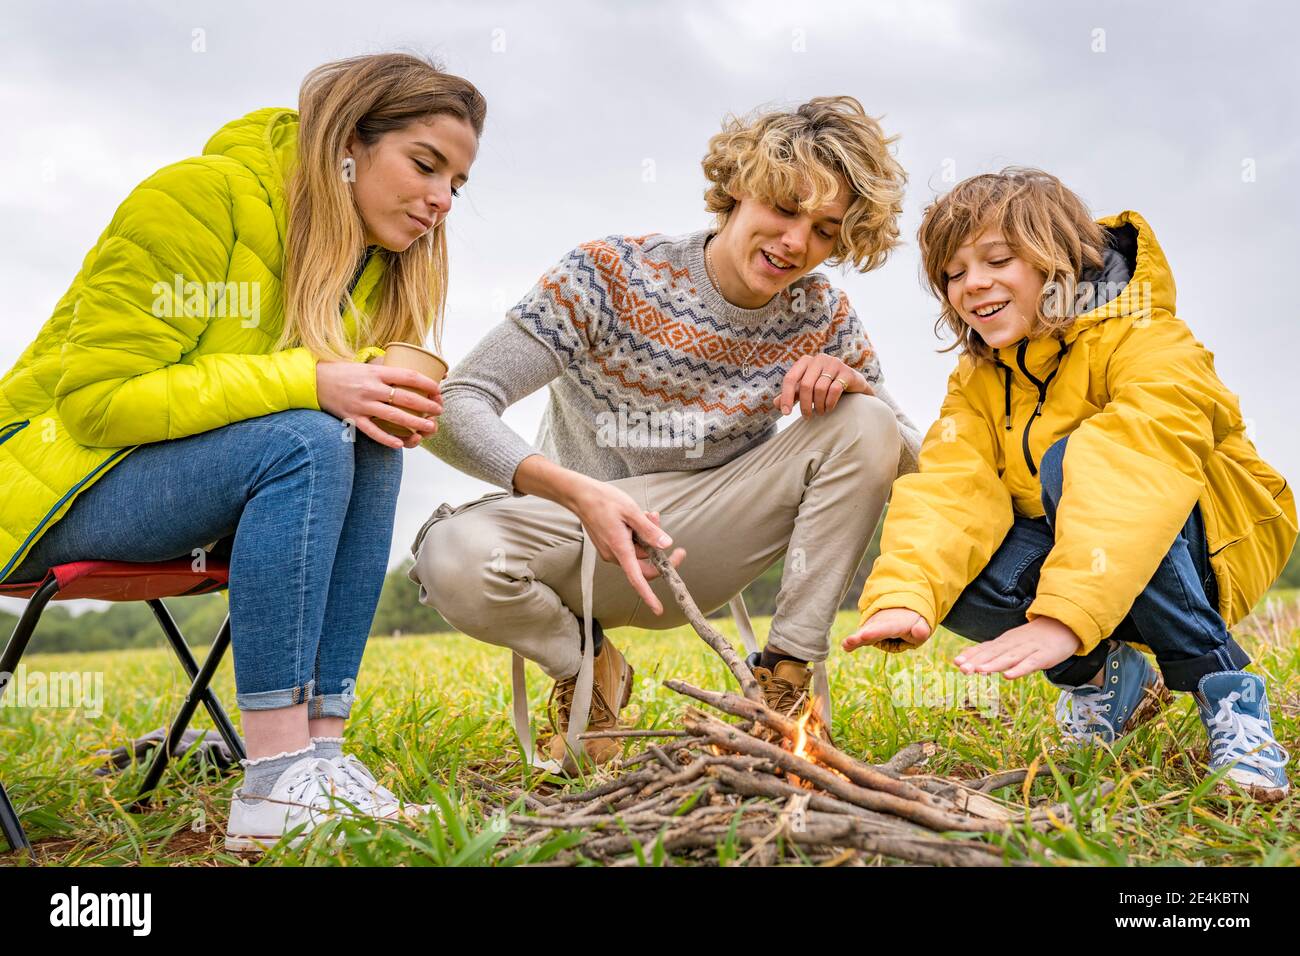 Three siblings starting campfire in grassy field Stock Photo